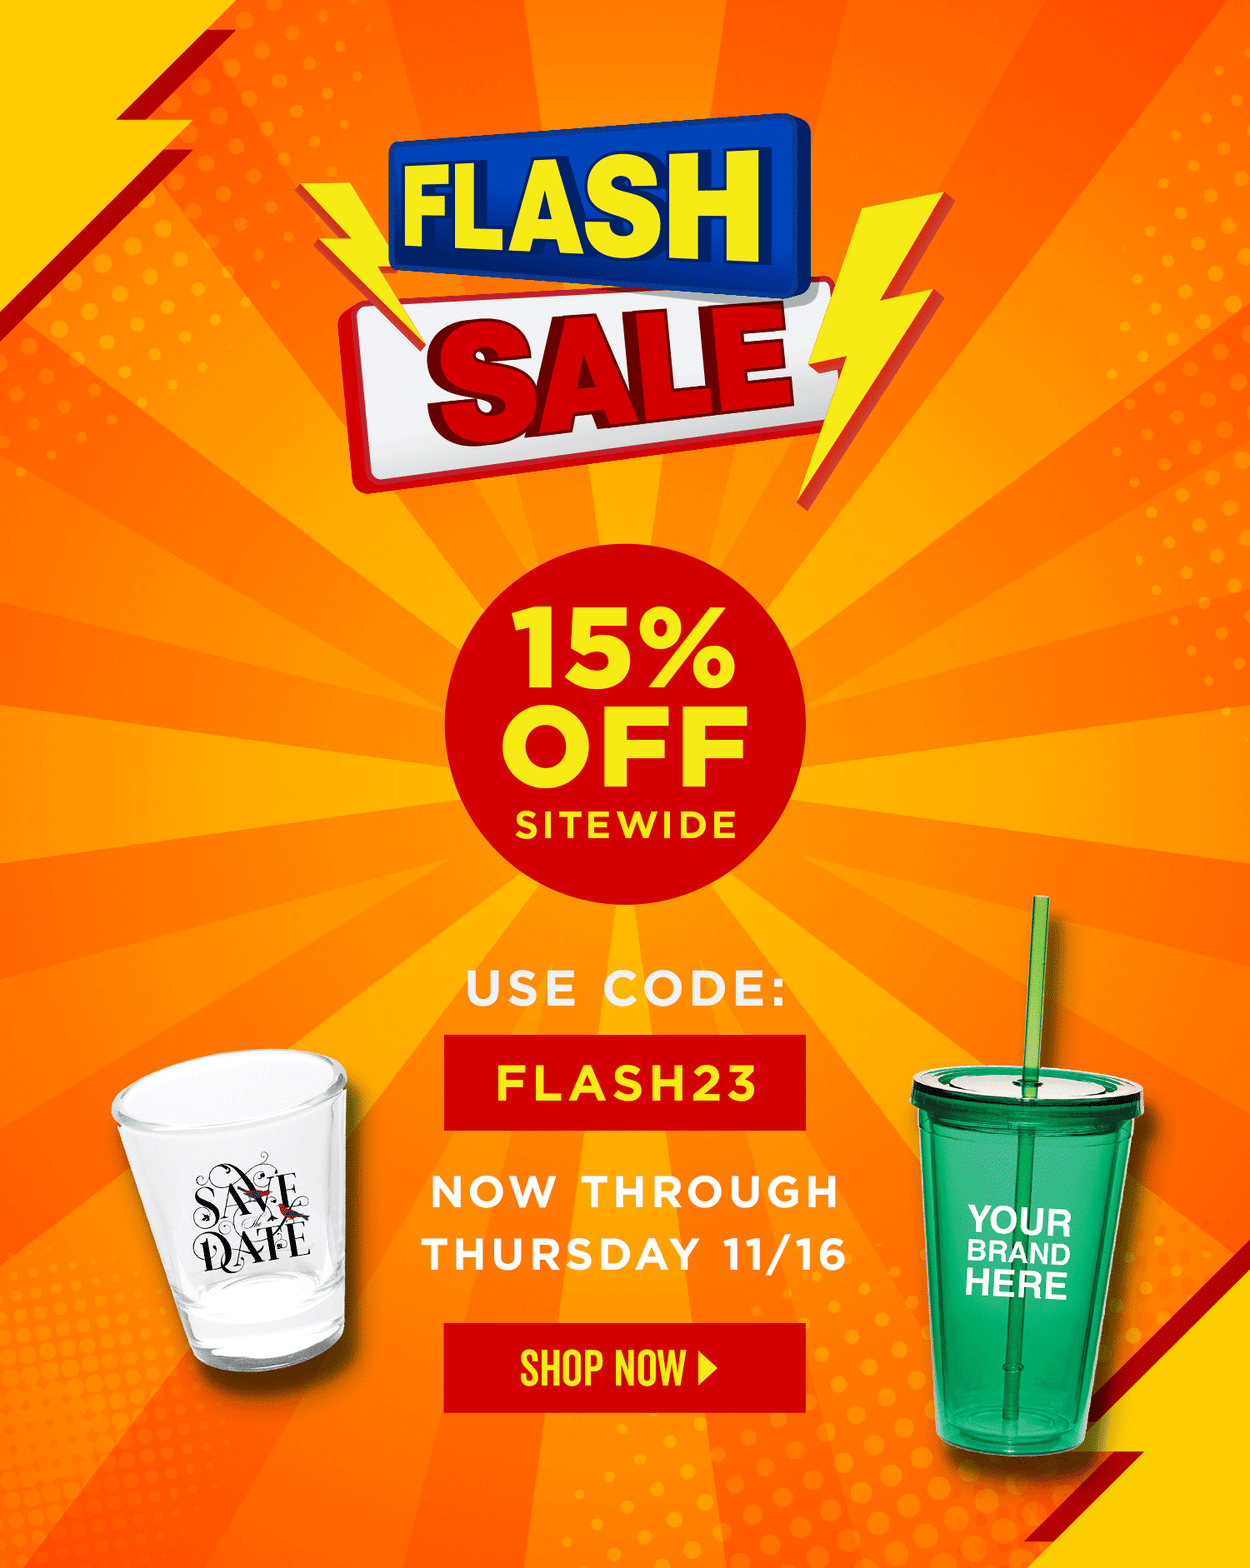 Flash Sale | 15% Off Sitewide | Use Code: FLASH23 | Shop Now